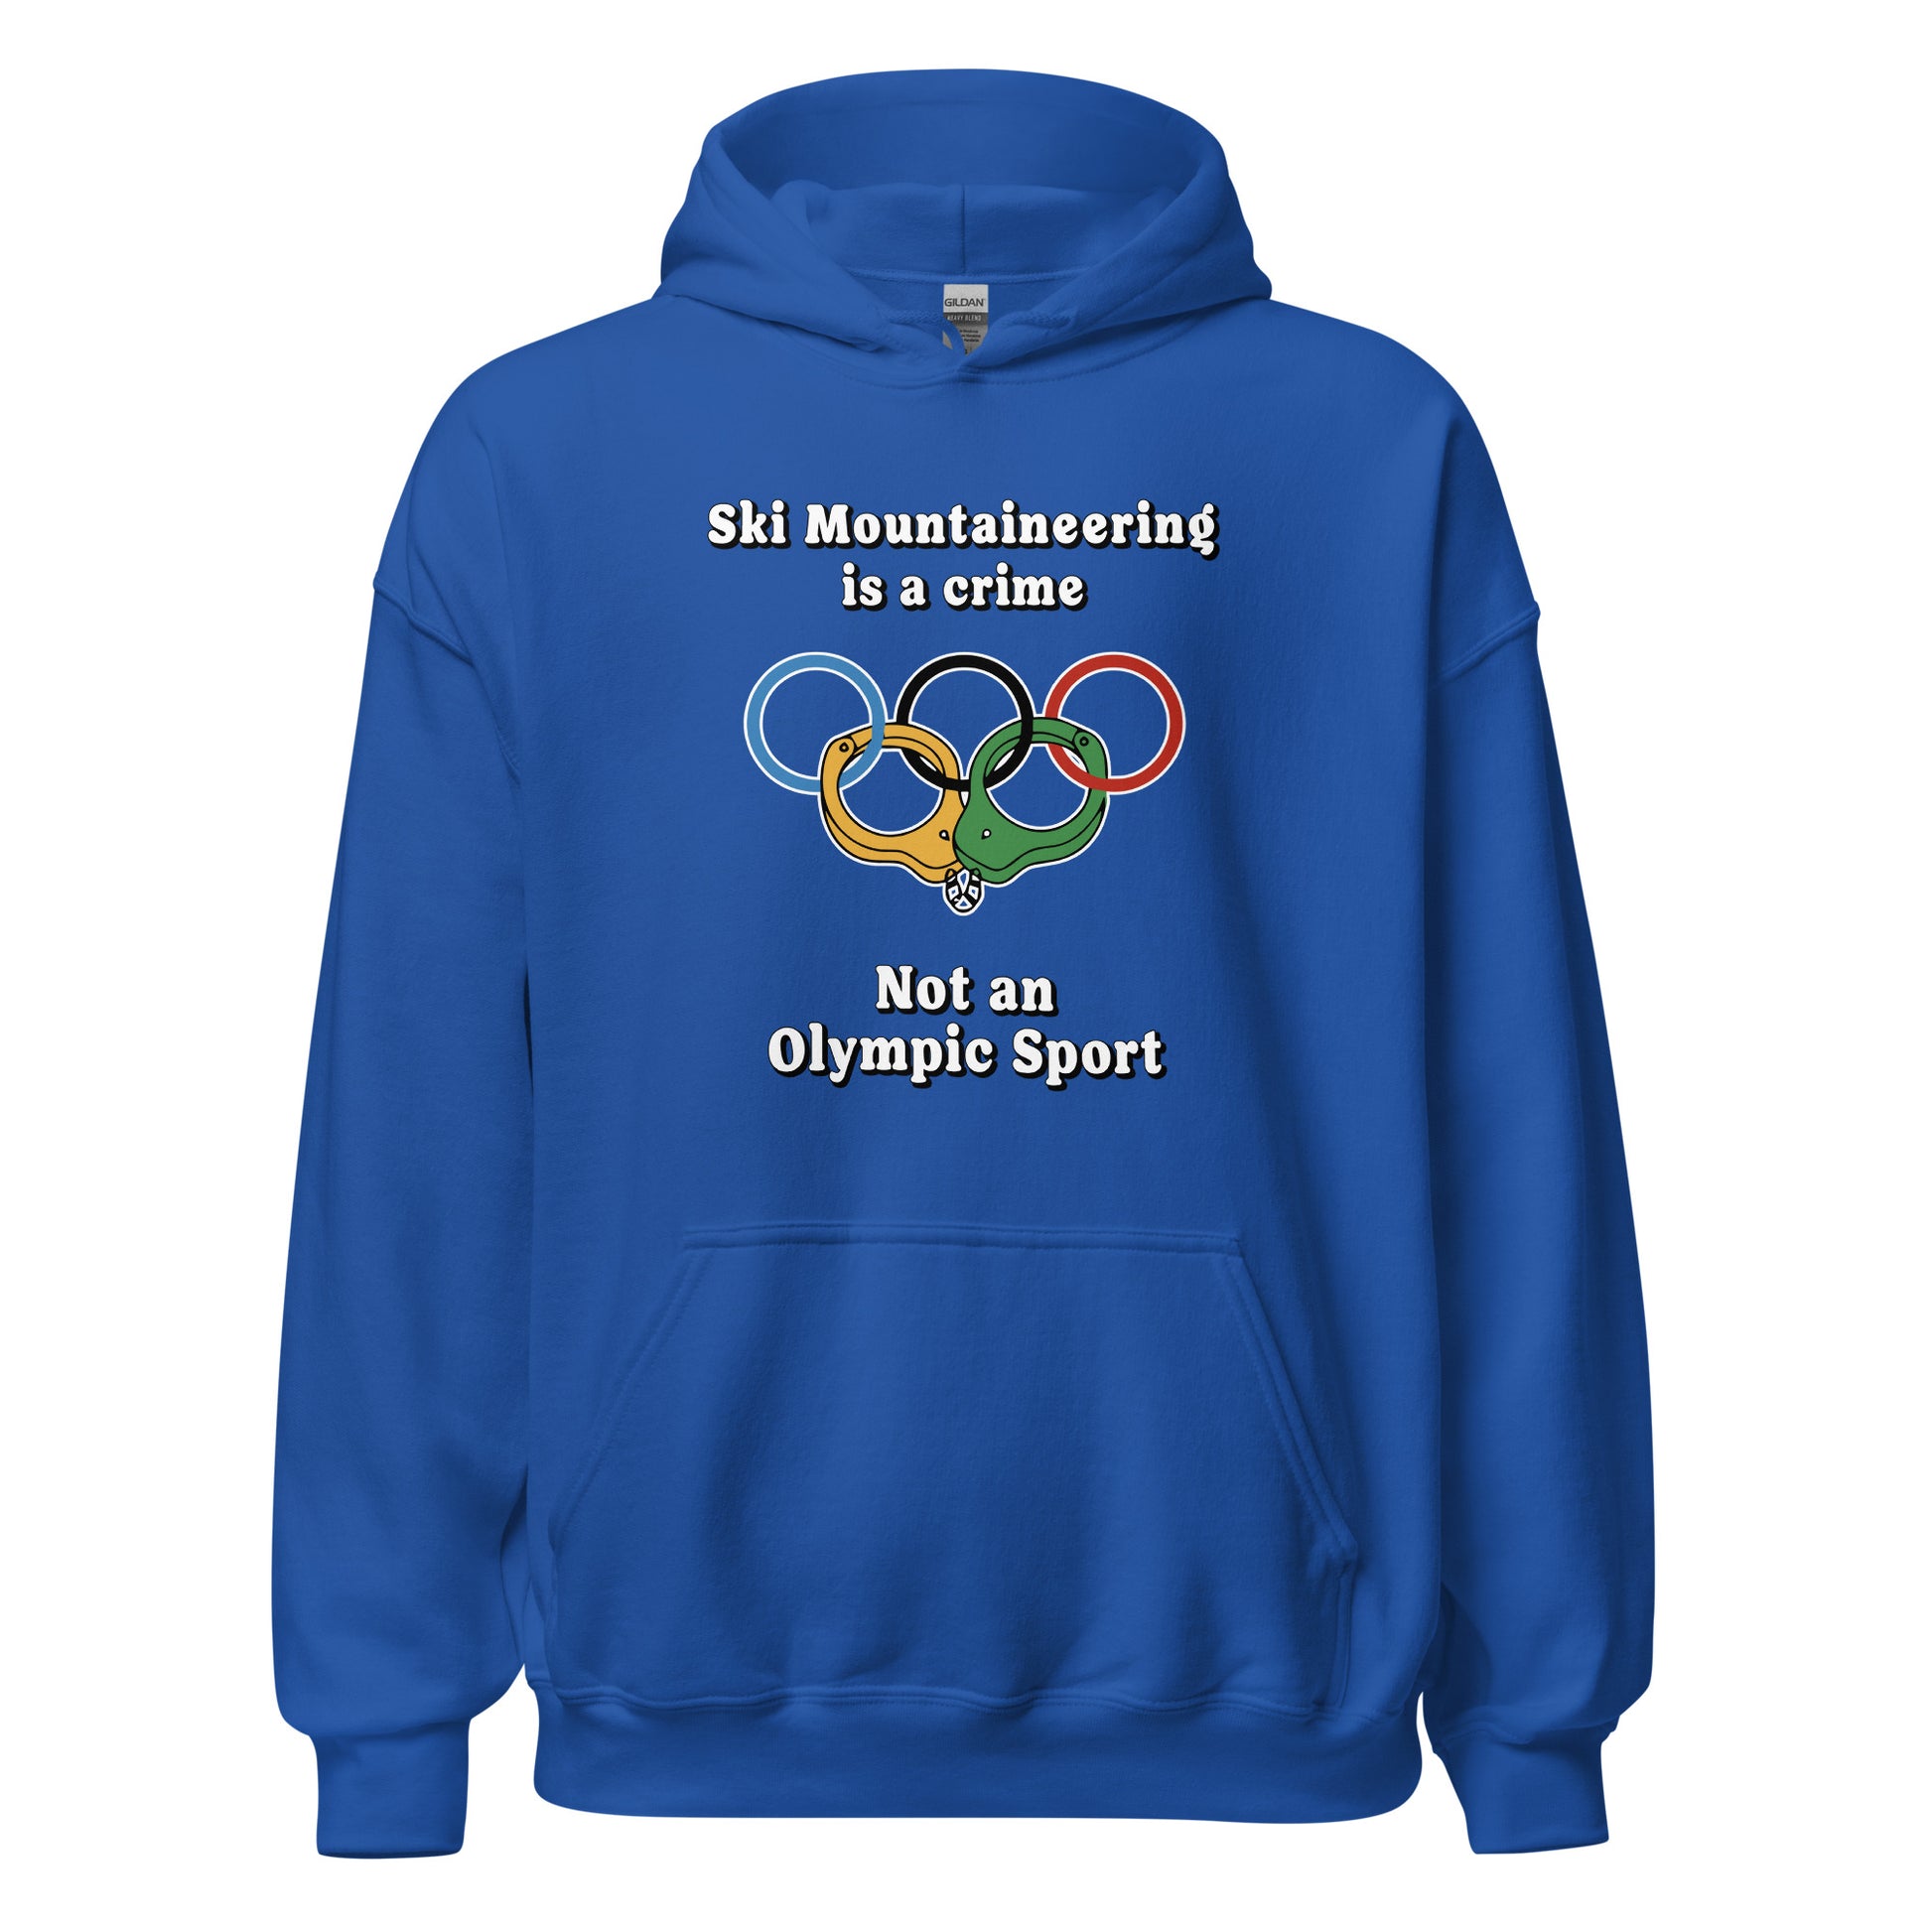 Ski Mountaineering is a crime not an olympic sport design printed on hoodie by Whistler Shirts